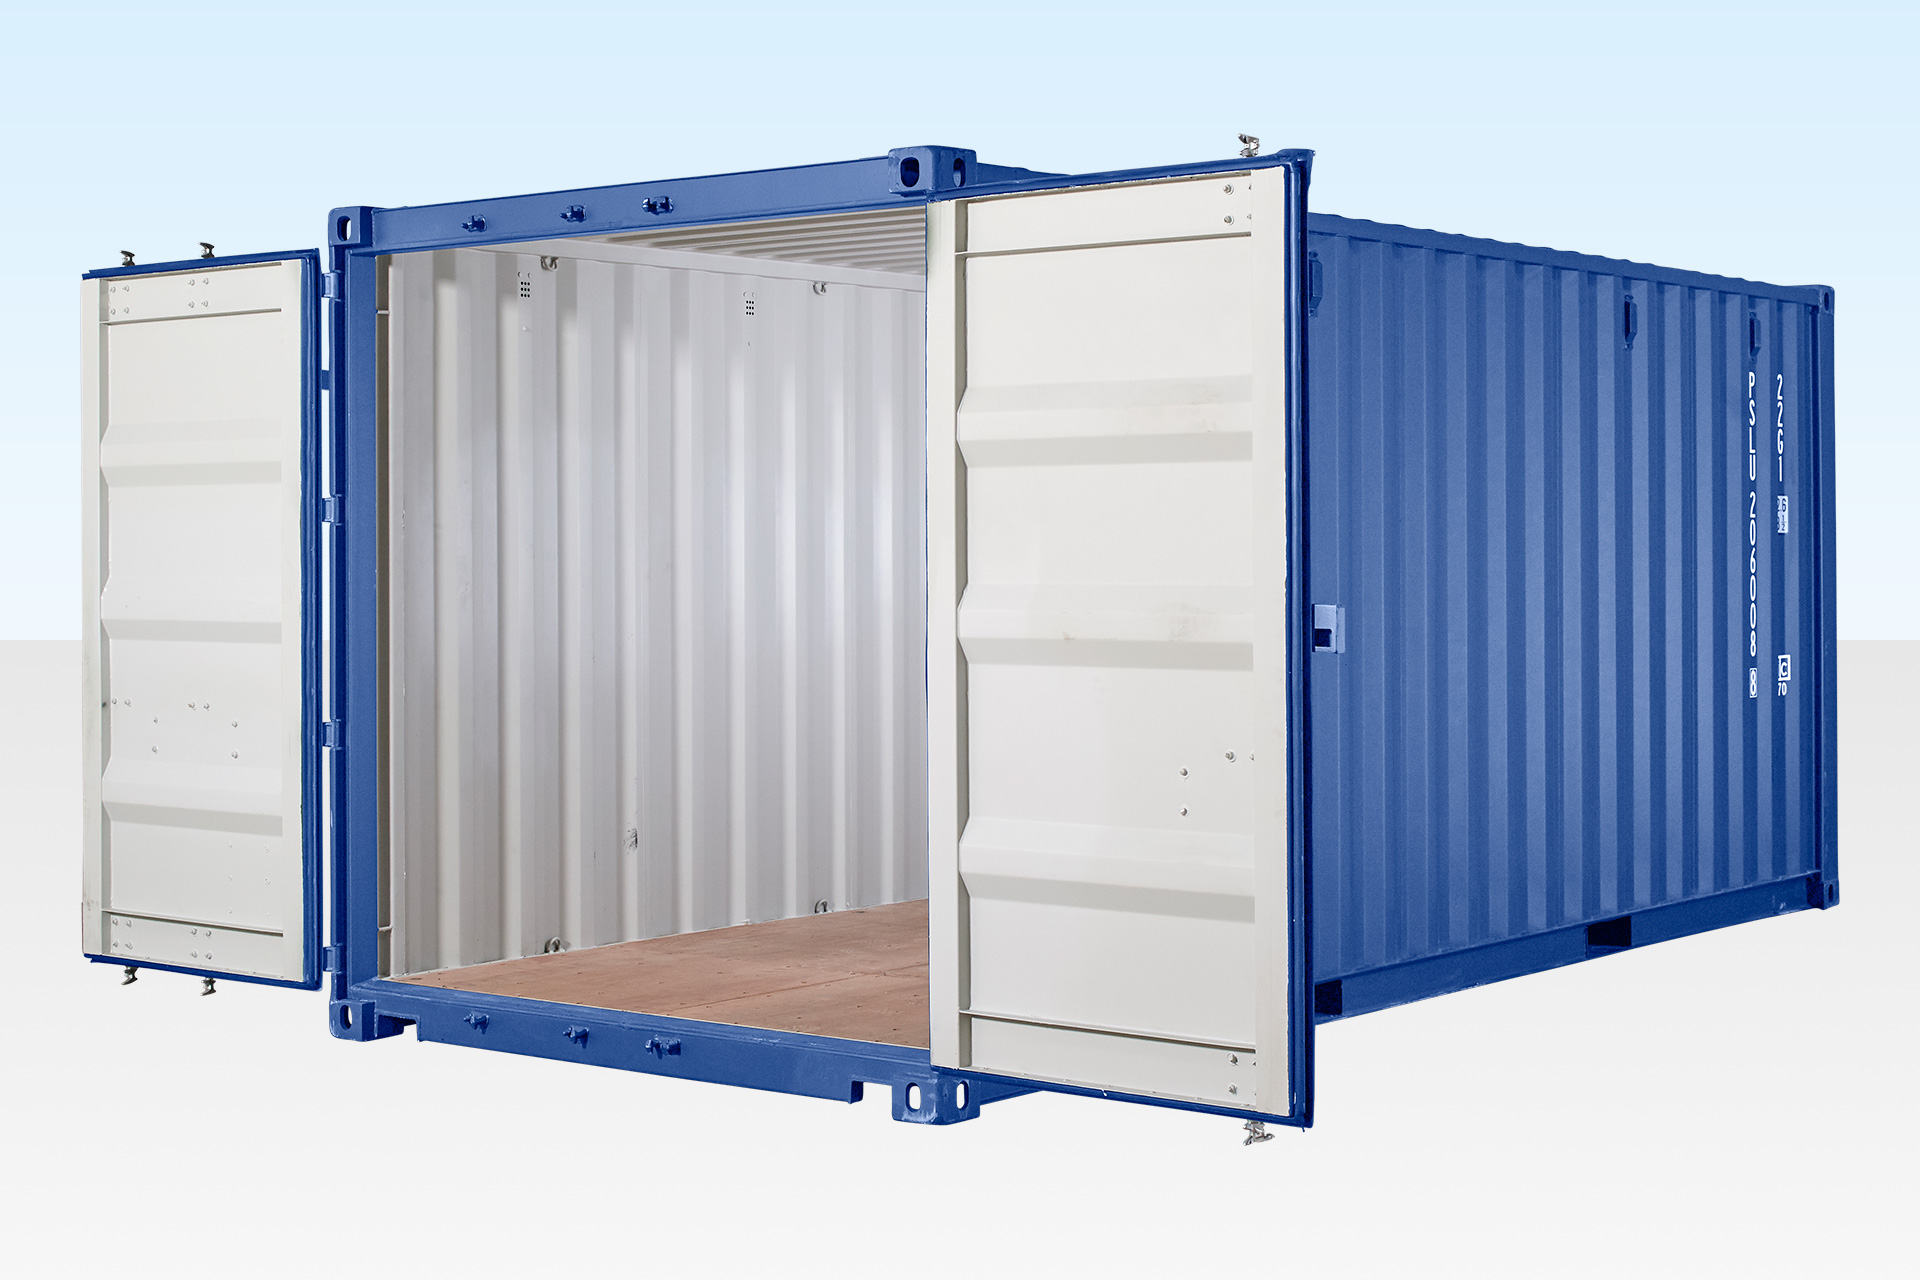 How do you buy the right containers for shipping and storage needs?